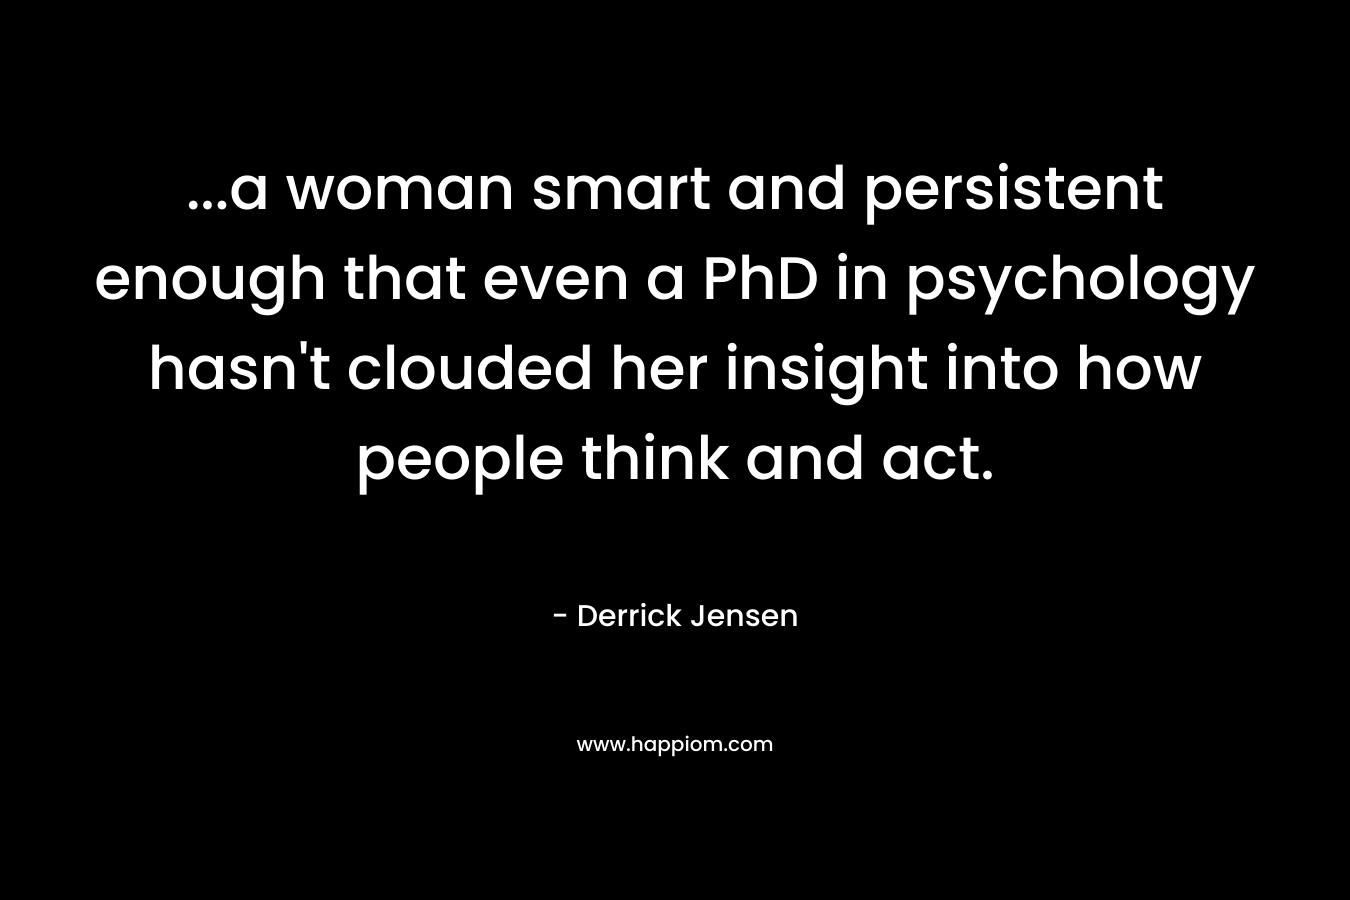 ...a woman smart and persistent enough that even a PhD in psychology hasn't clouded her insight into how people think and act.